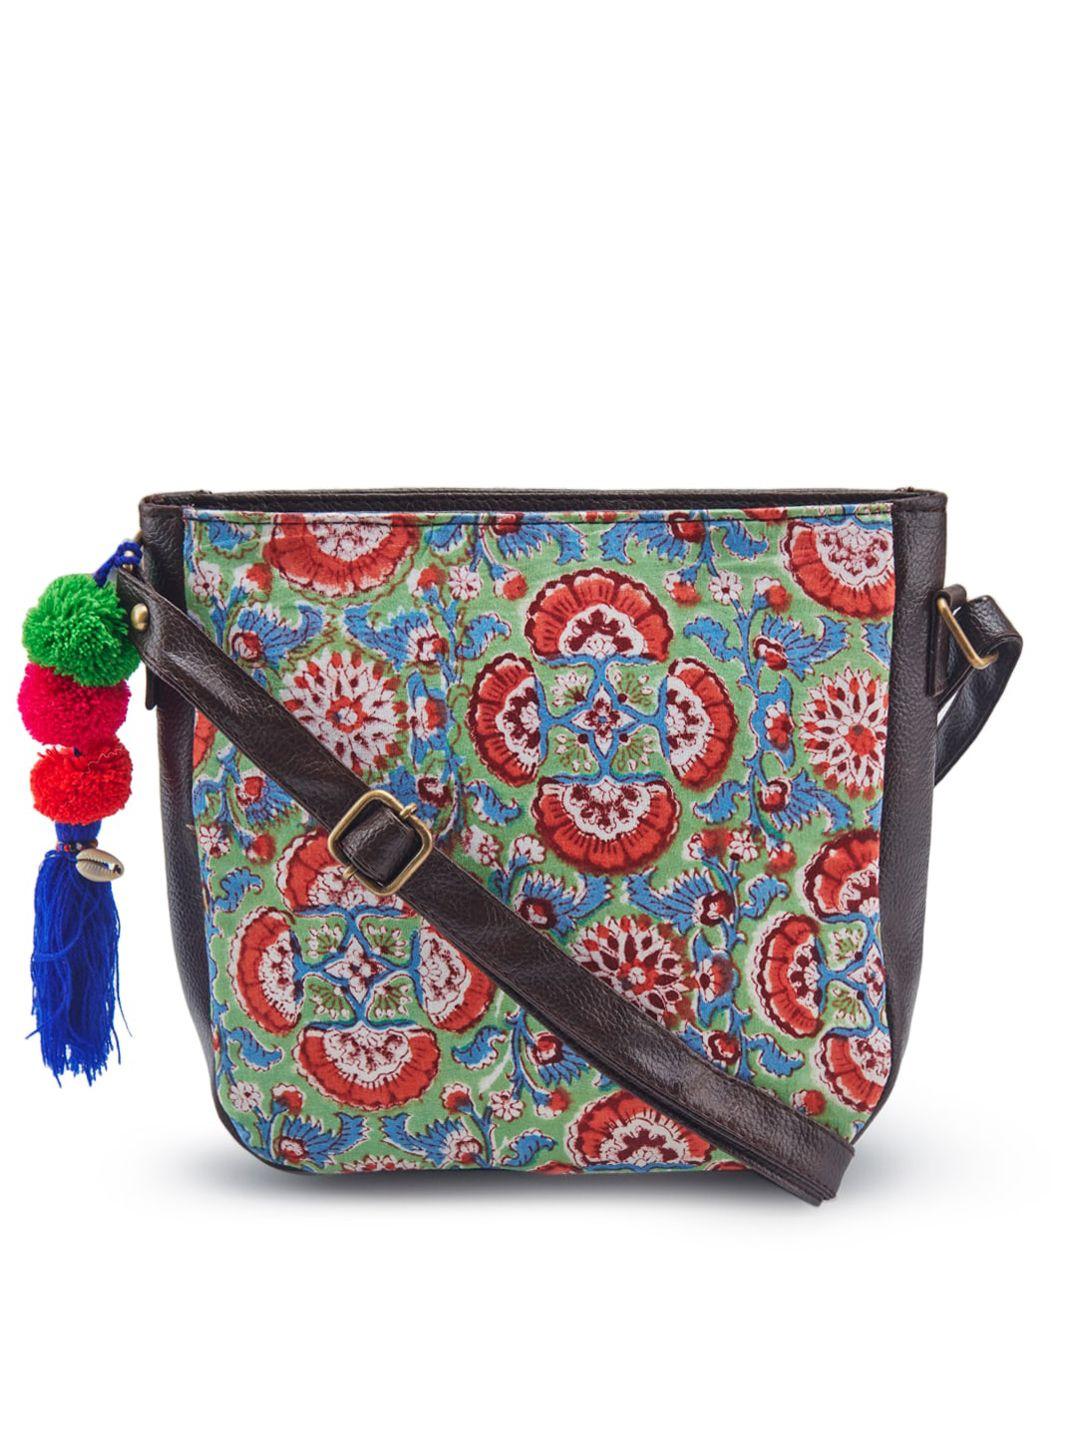 nepri ethnic motif printed structured sling bag with tasselled